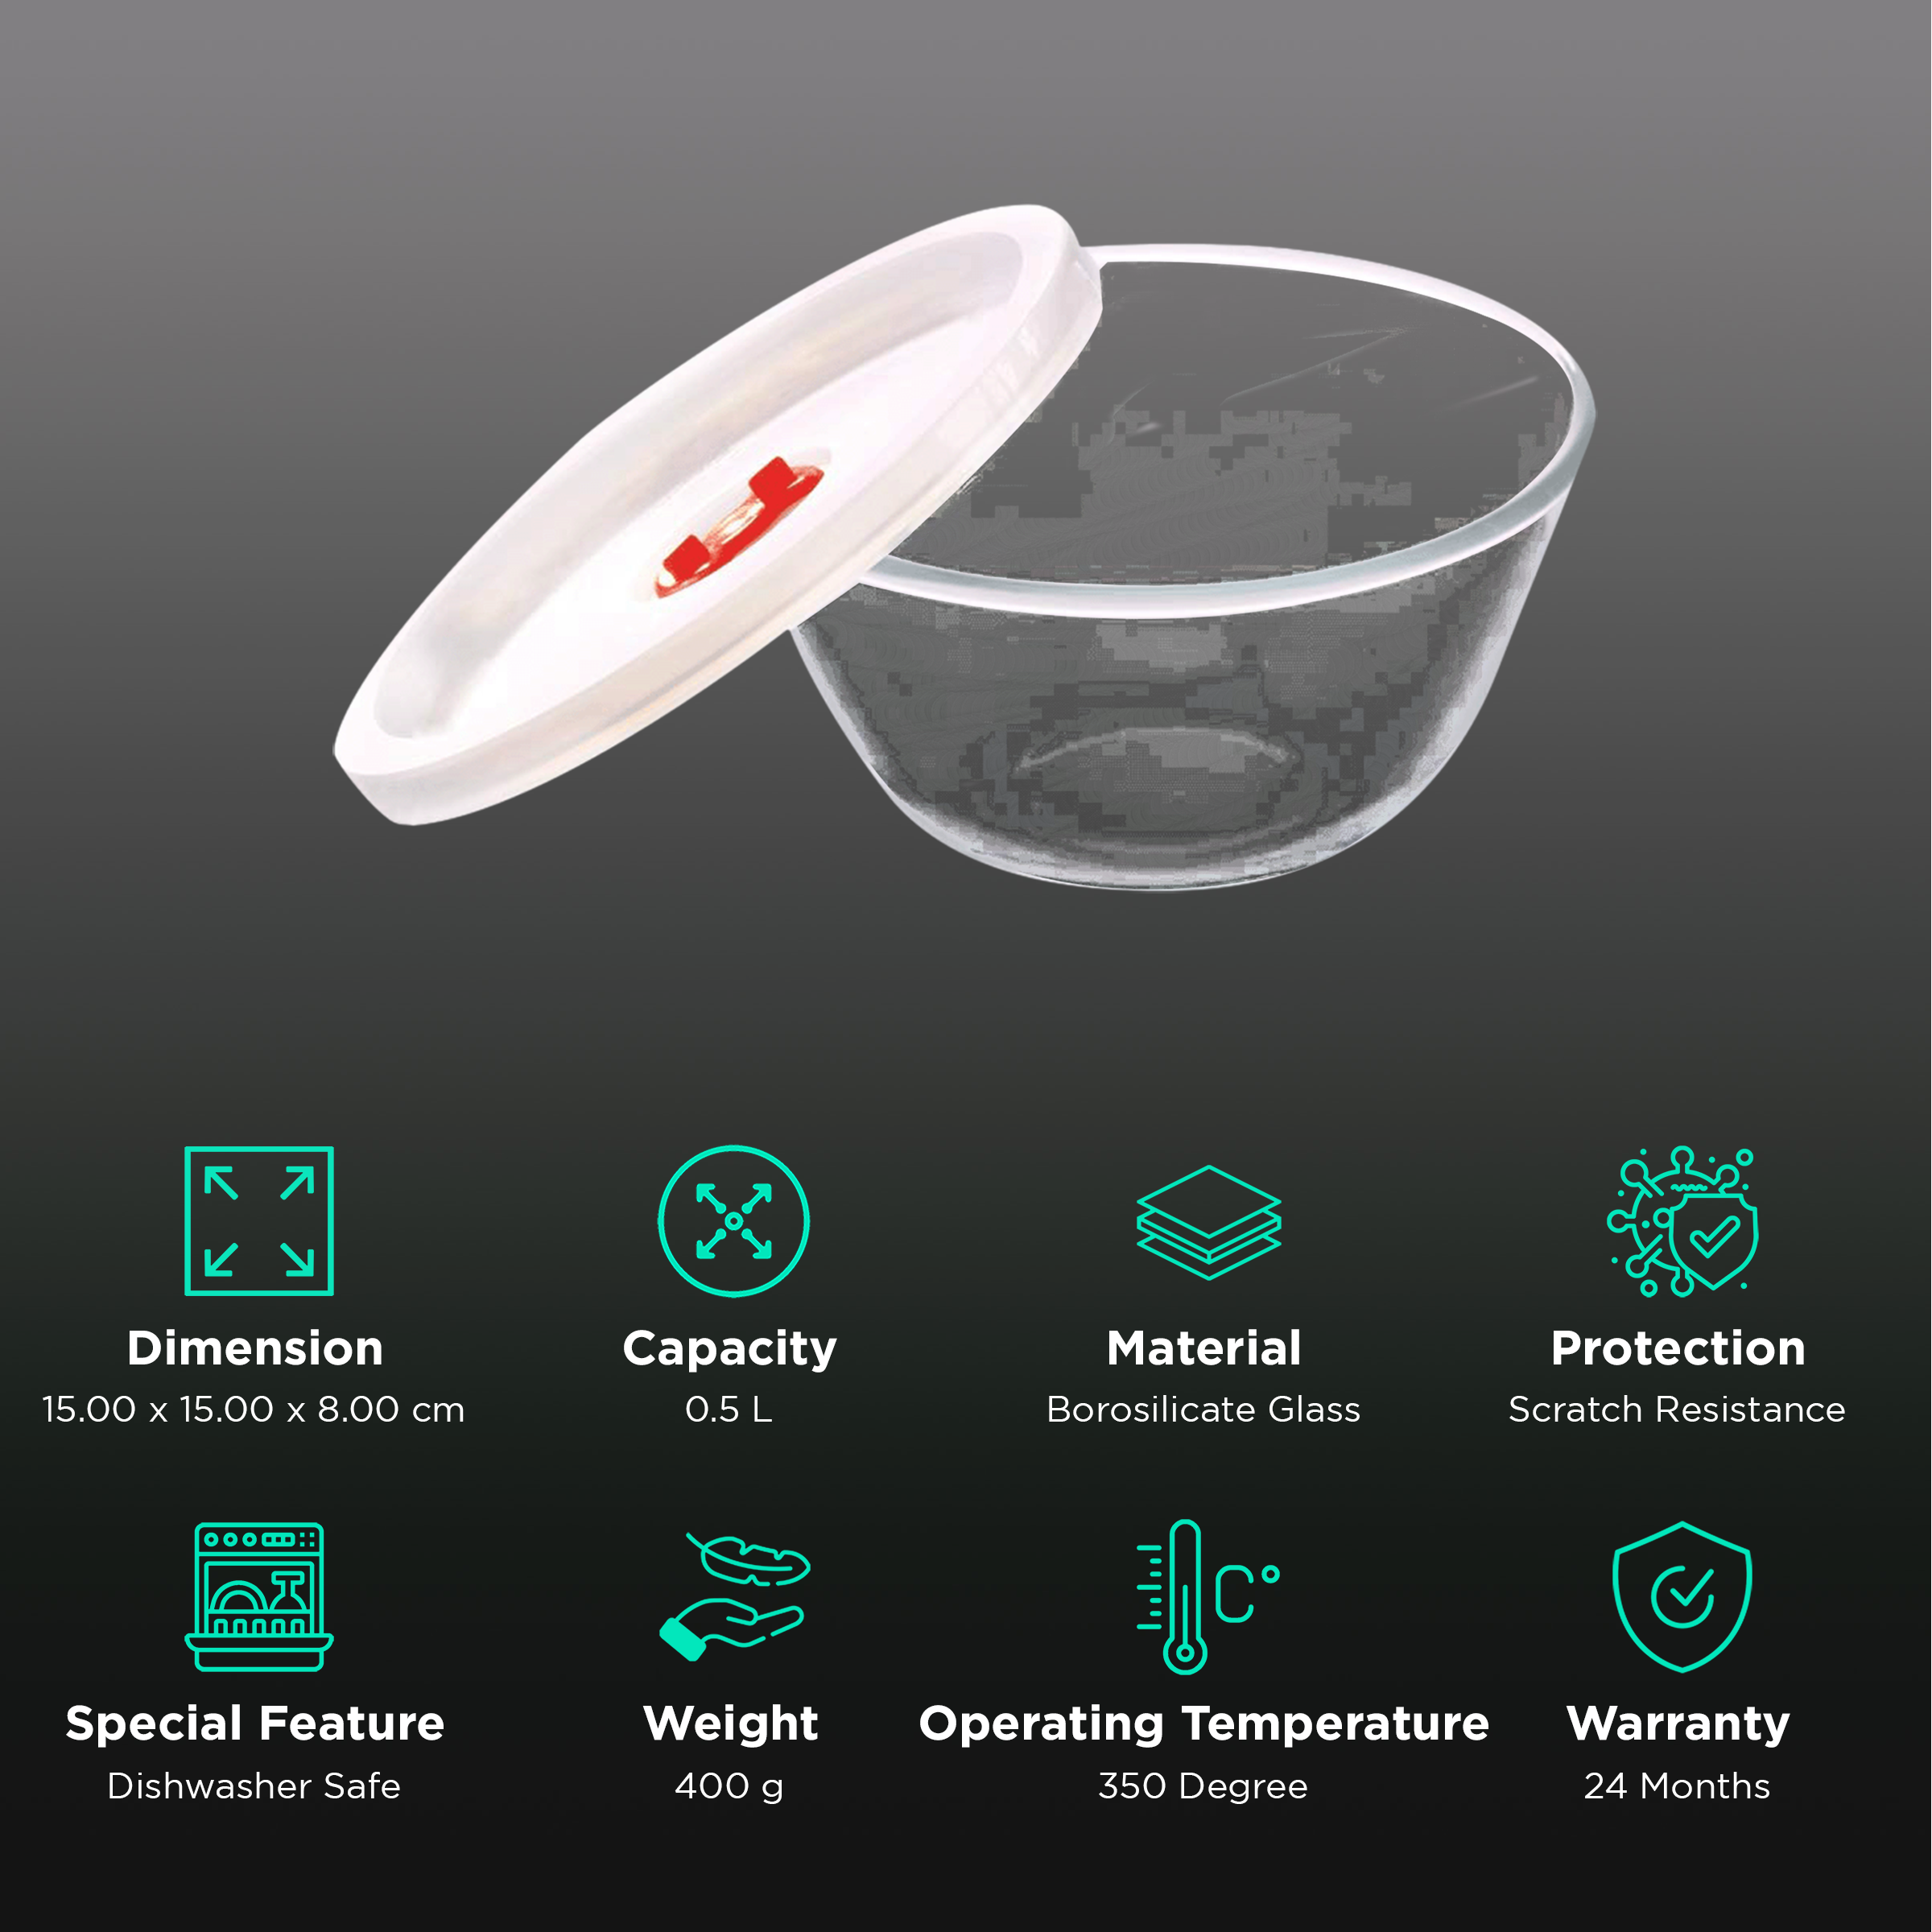 Borosil borosil glass mixing bowl with lid - set of 3 (500 ml + 900 ml +  1.3l) oven and microwave safe